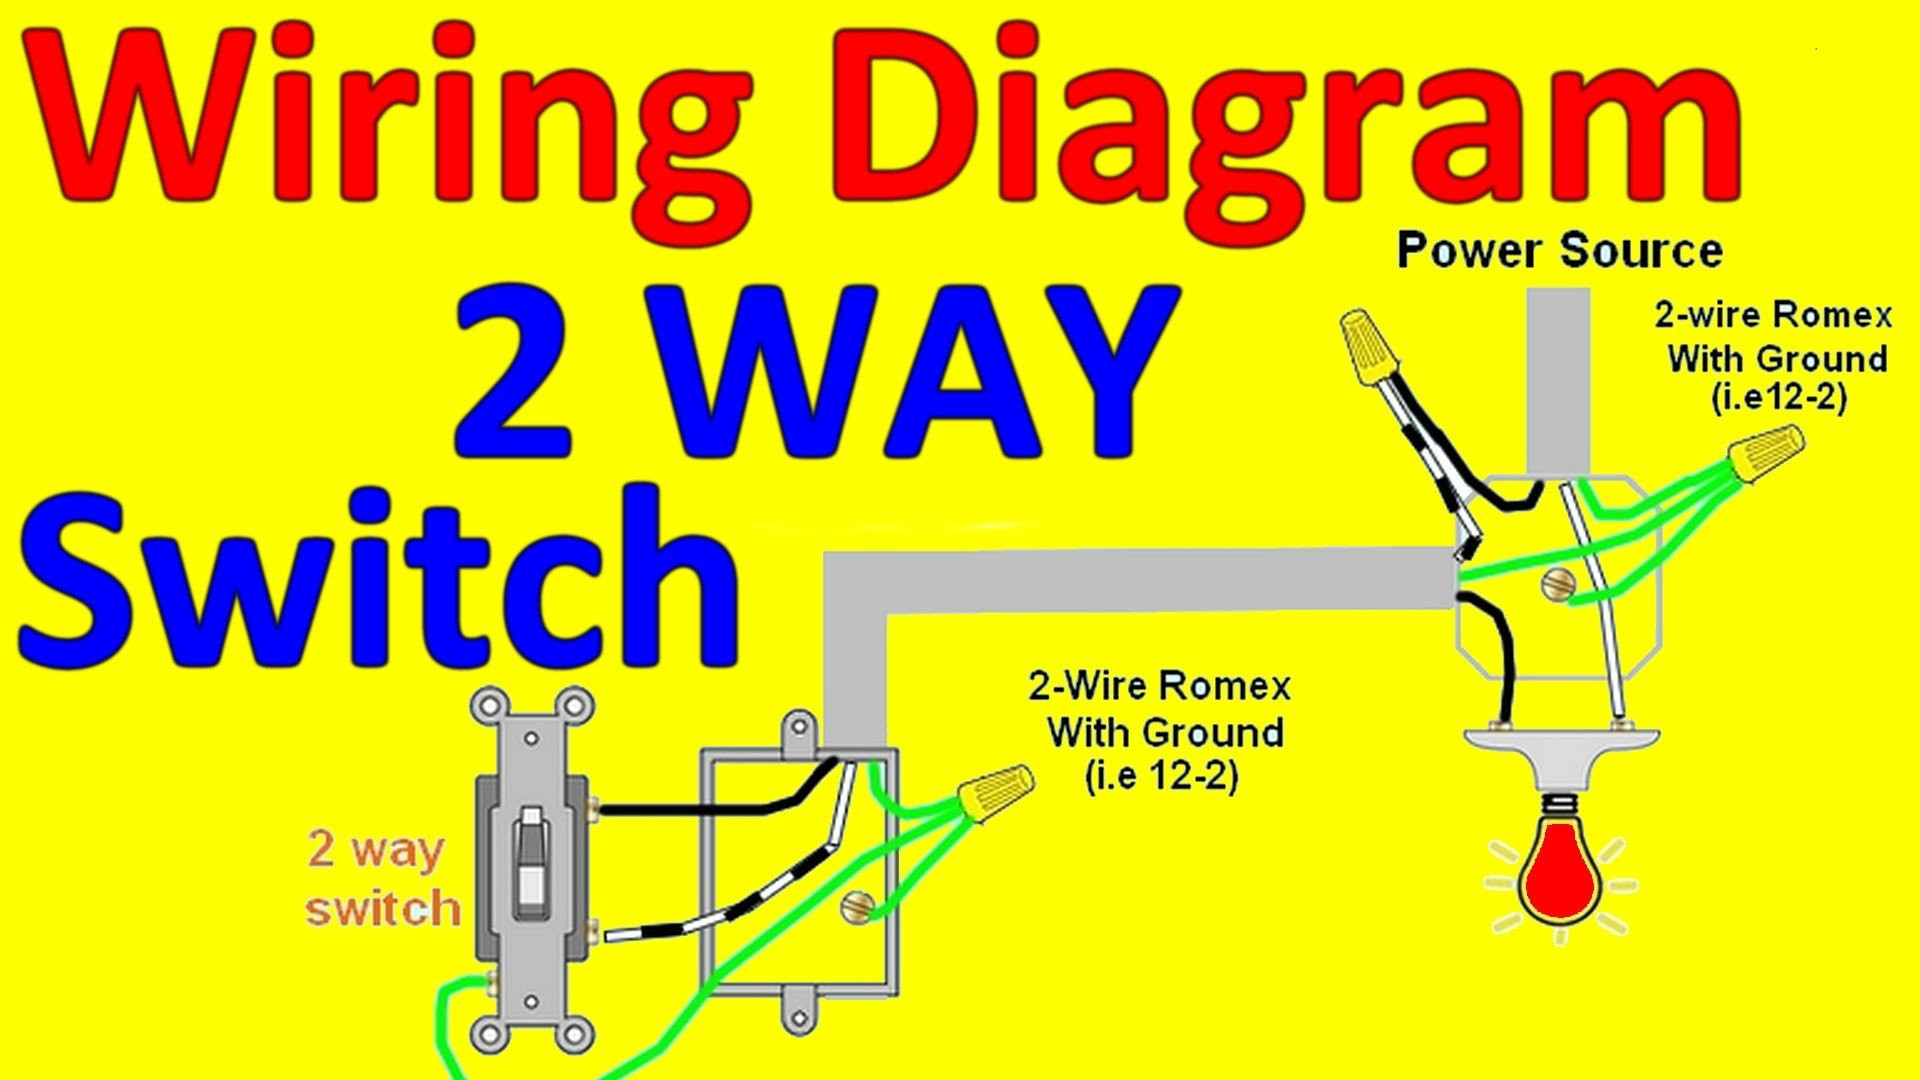 Wiring Diagram Two Gang Two Way Switch Sample Pdf 2 Gang Switch - 2 Way Switch Wiring Diagram Pdf